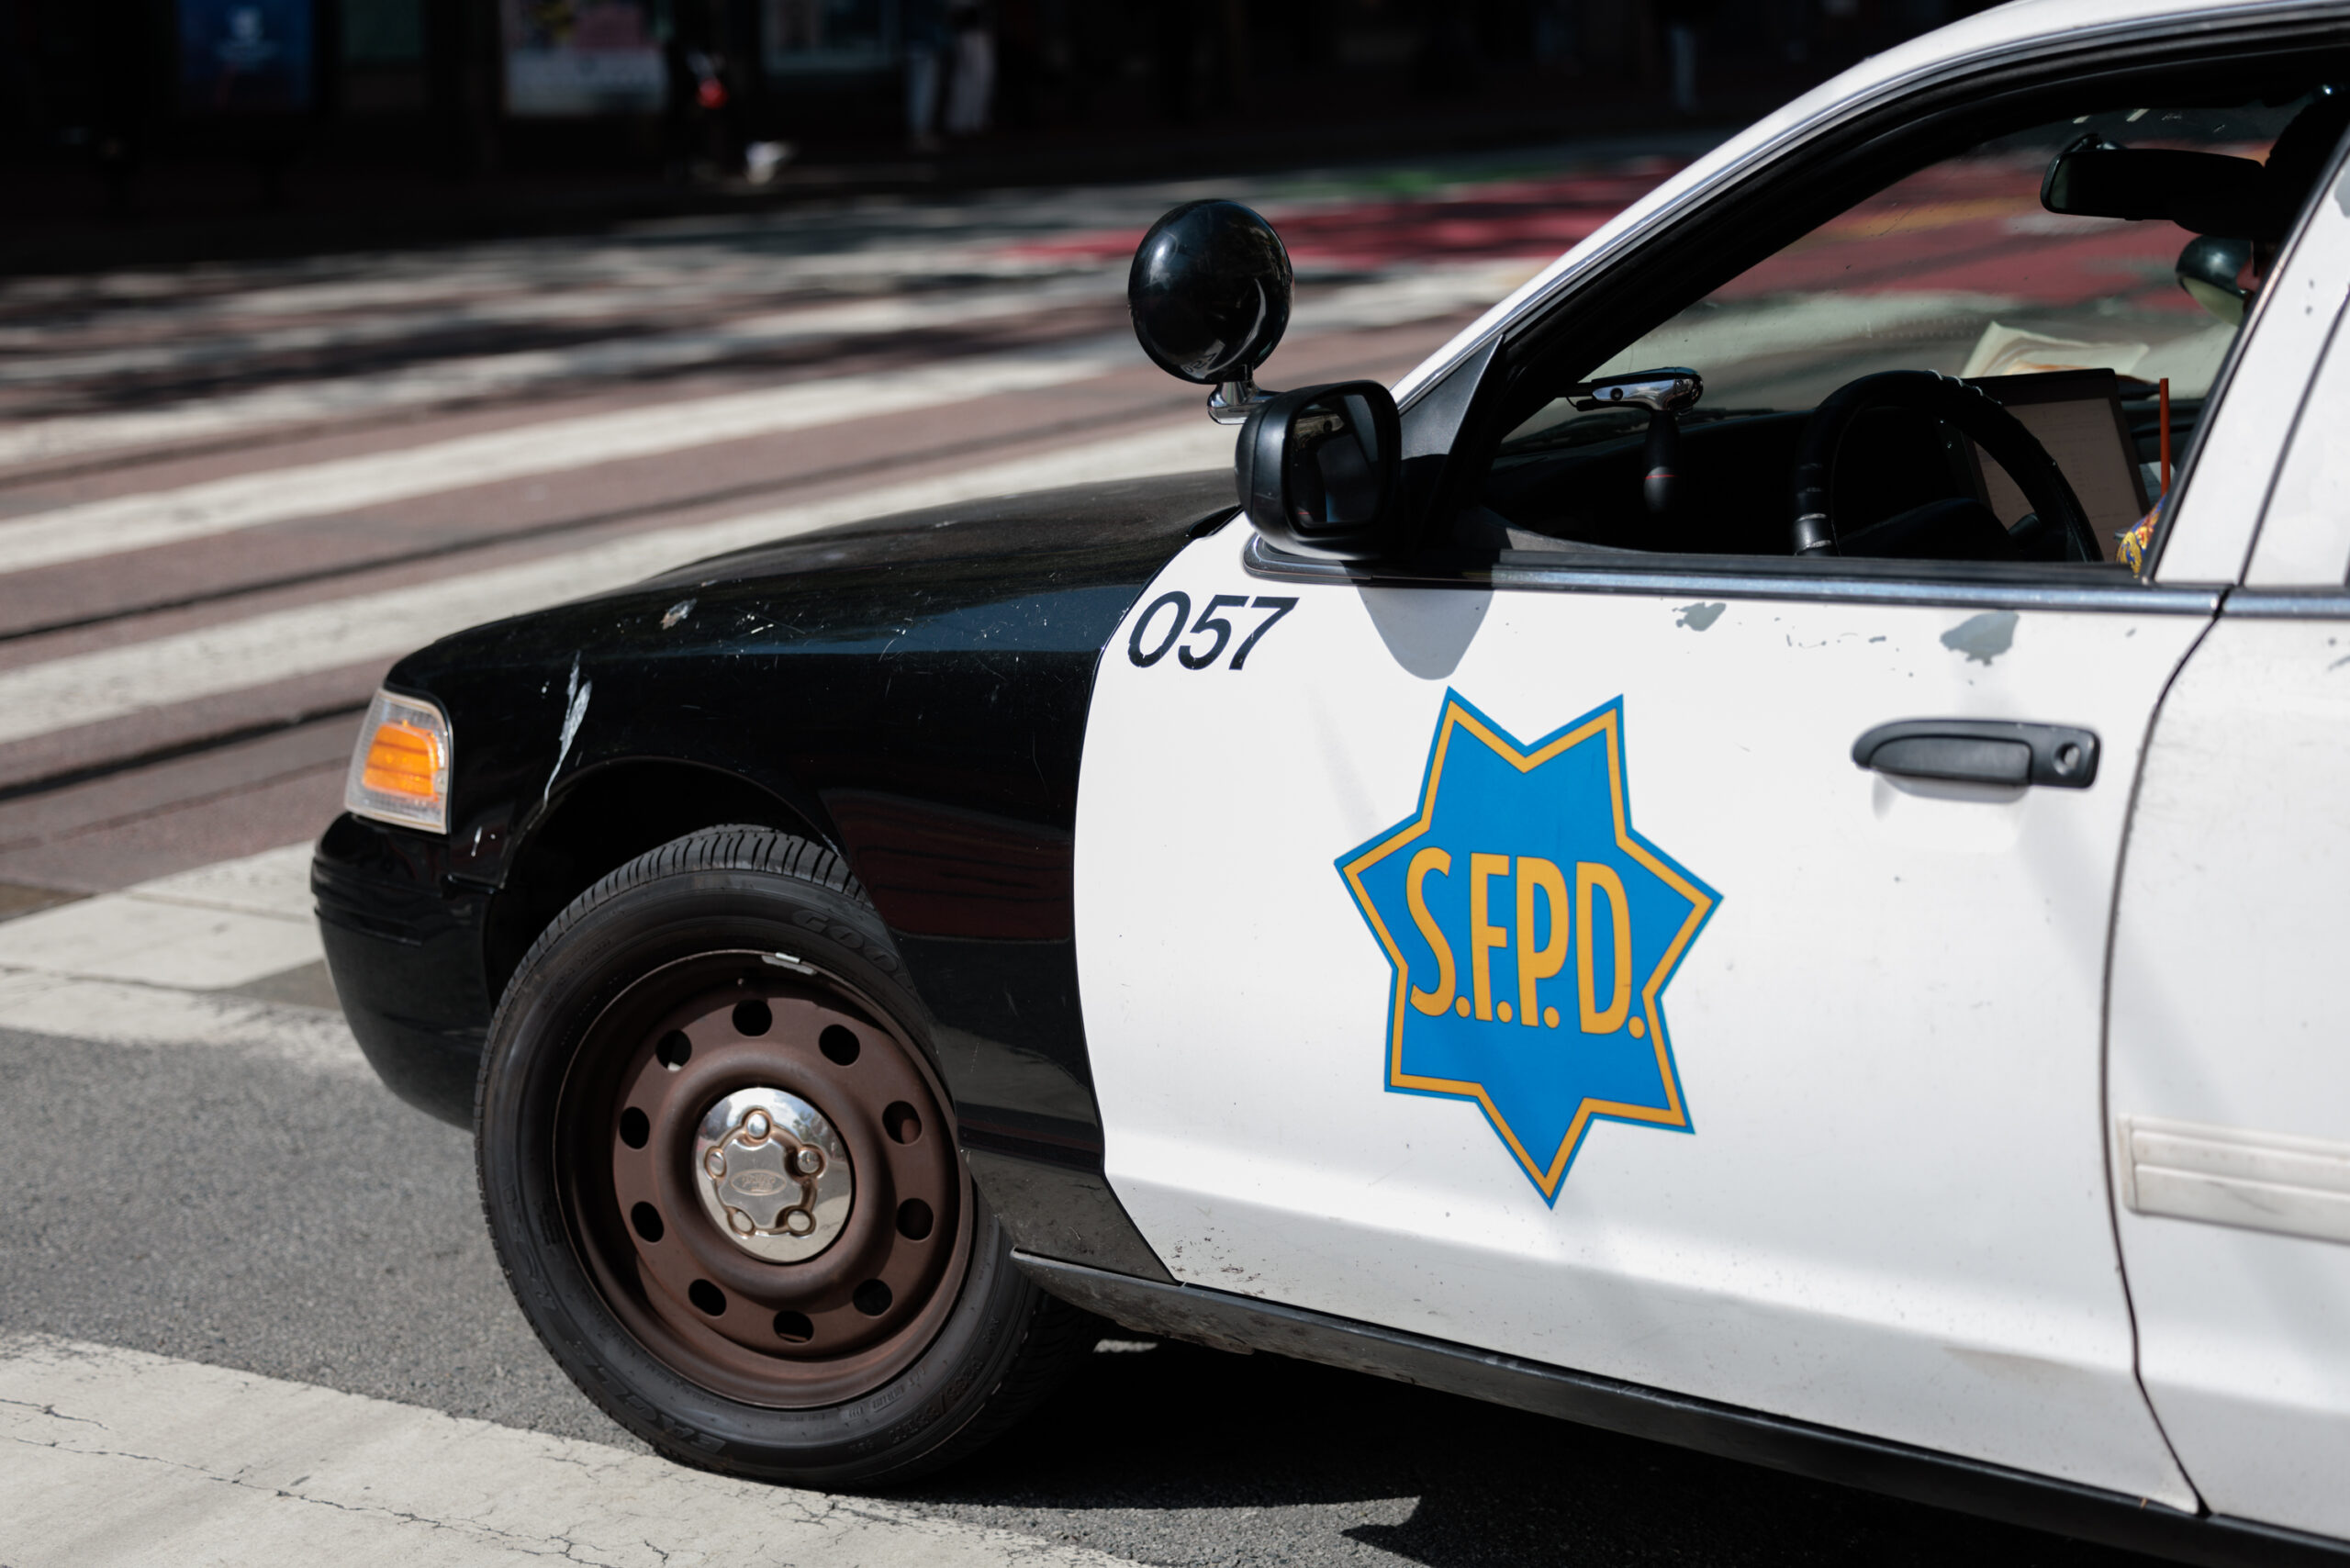 The San Francisco Police Department announced Friday it is offering a $25,000 reward for information about an August shooting which left a 22-year-old man dead.